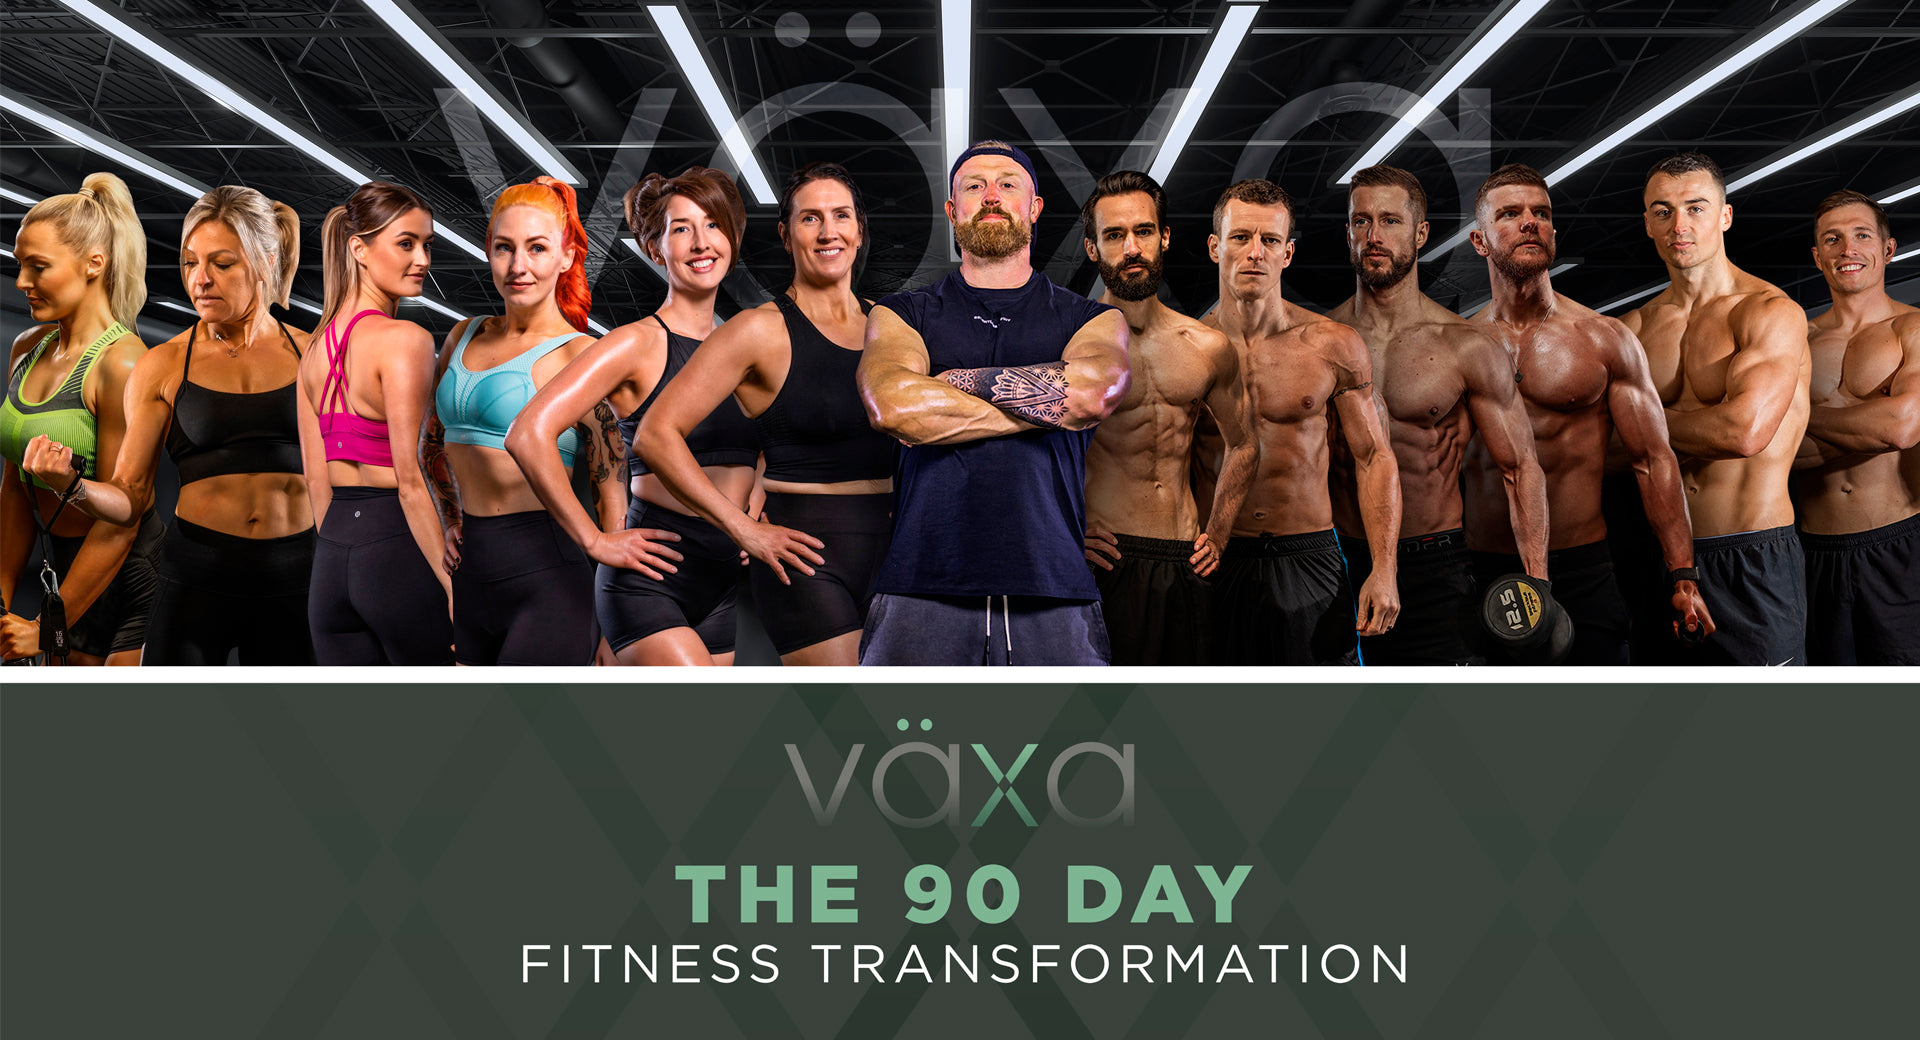 Sorg Fitness Workout with Halo Hot Yoga + Plus Transformation for Life  Workshop Live Sessions - Platinum Subscription - 12-Month Minimum  Commitment 